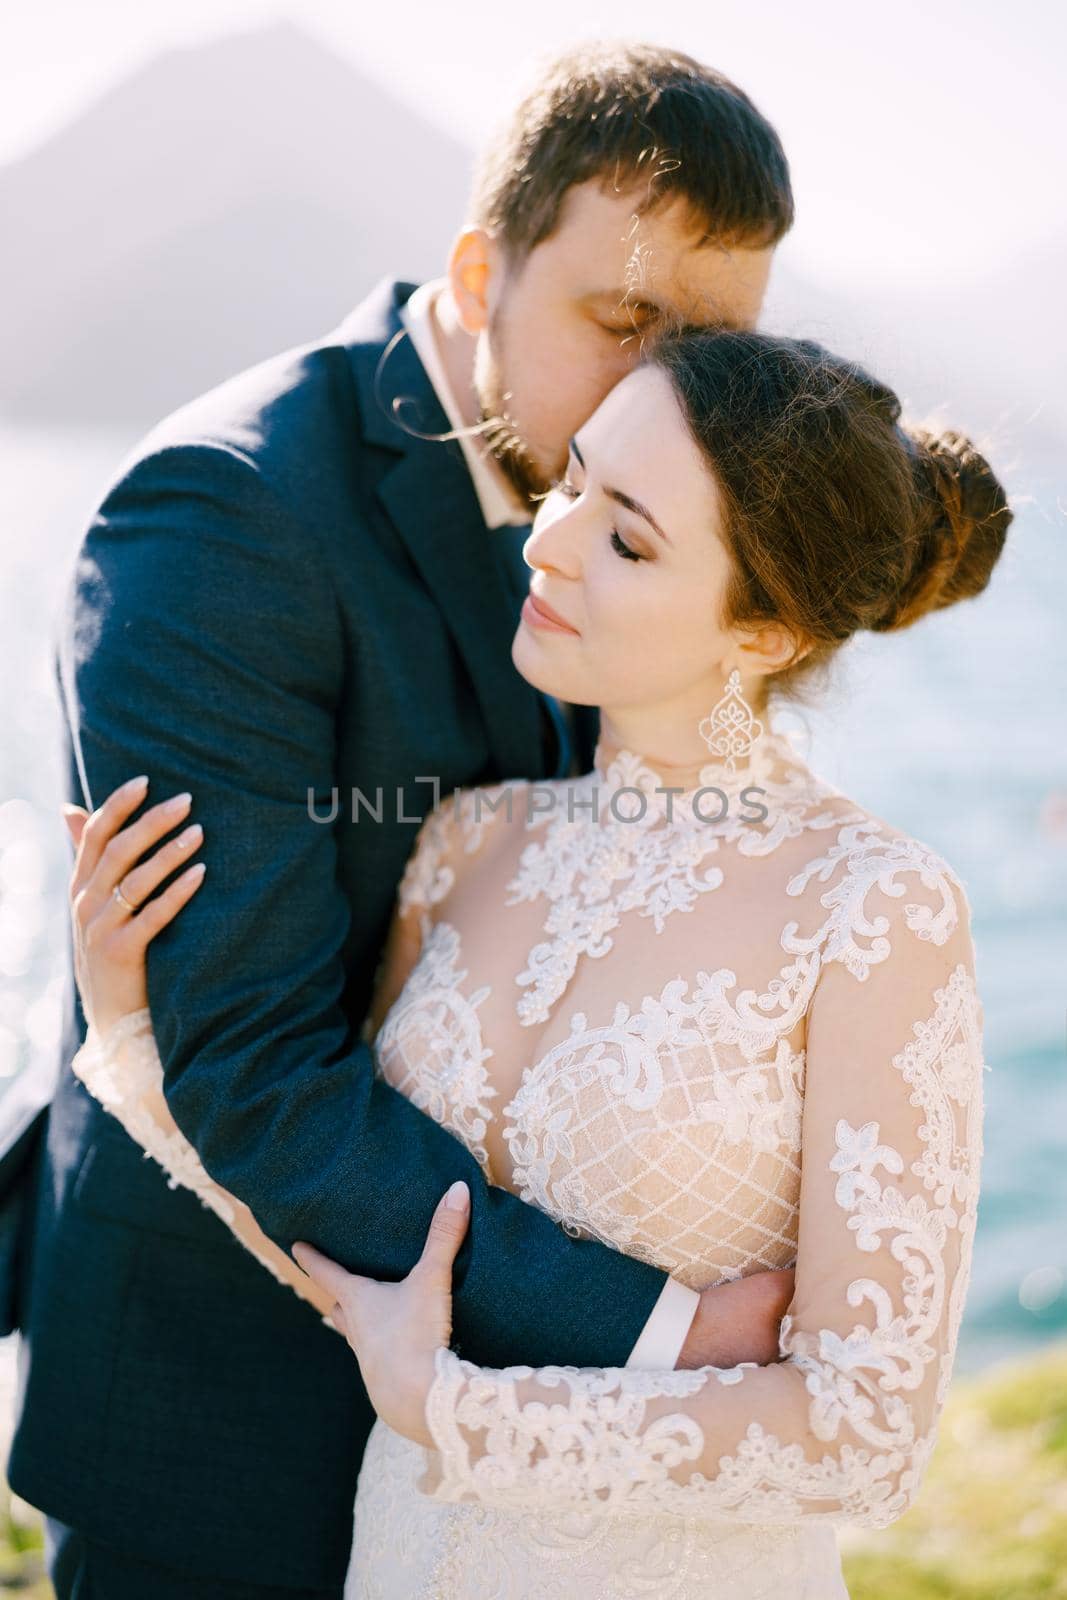 Groom hugs bride and kisses her cheek. Side view. Close-up. High quality photo